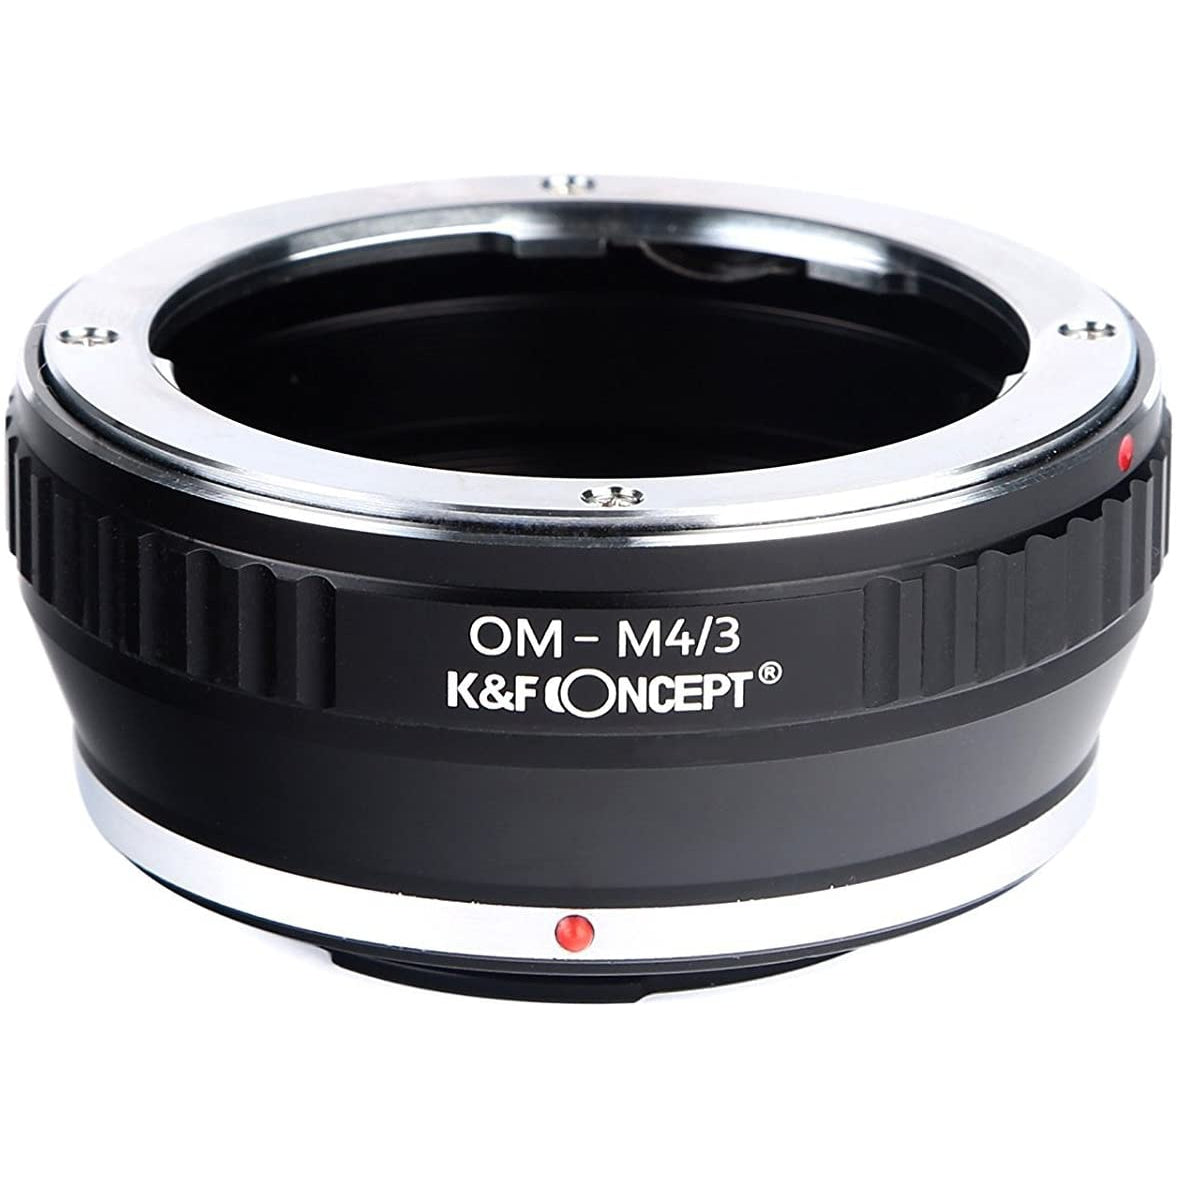 K&F Concept OM to Micro 4/3 Adapter, Manual Lens Mount Adapter OM-M4/3